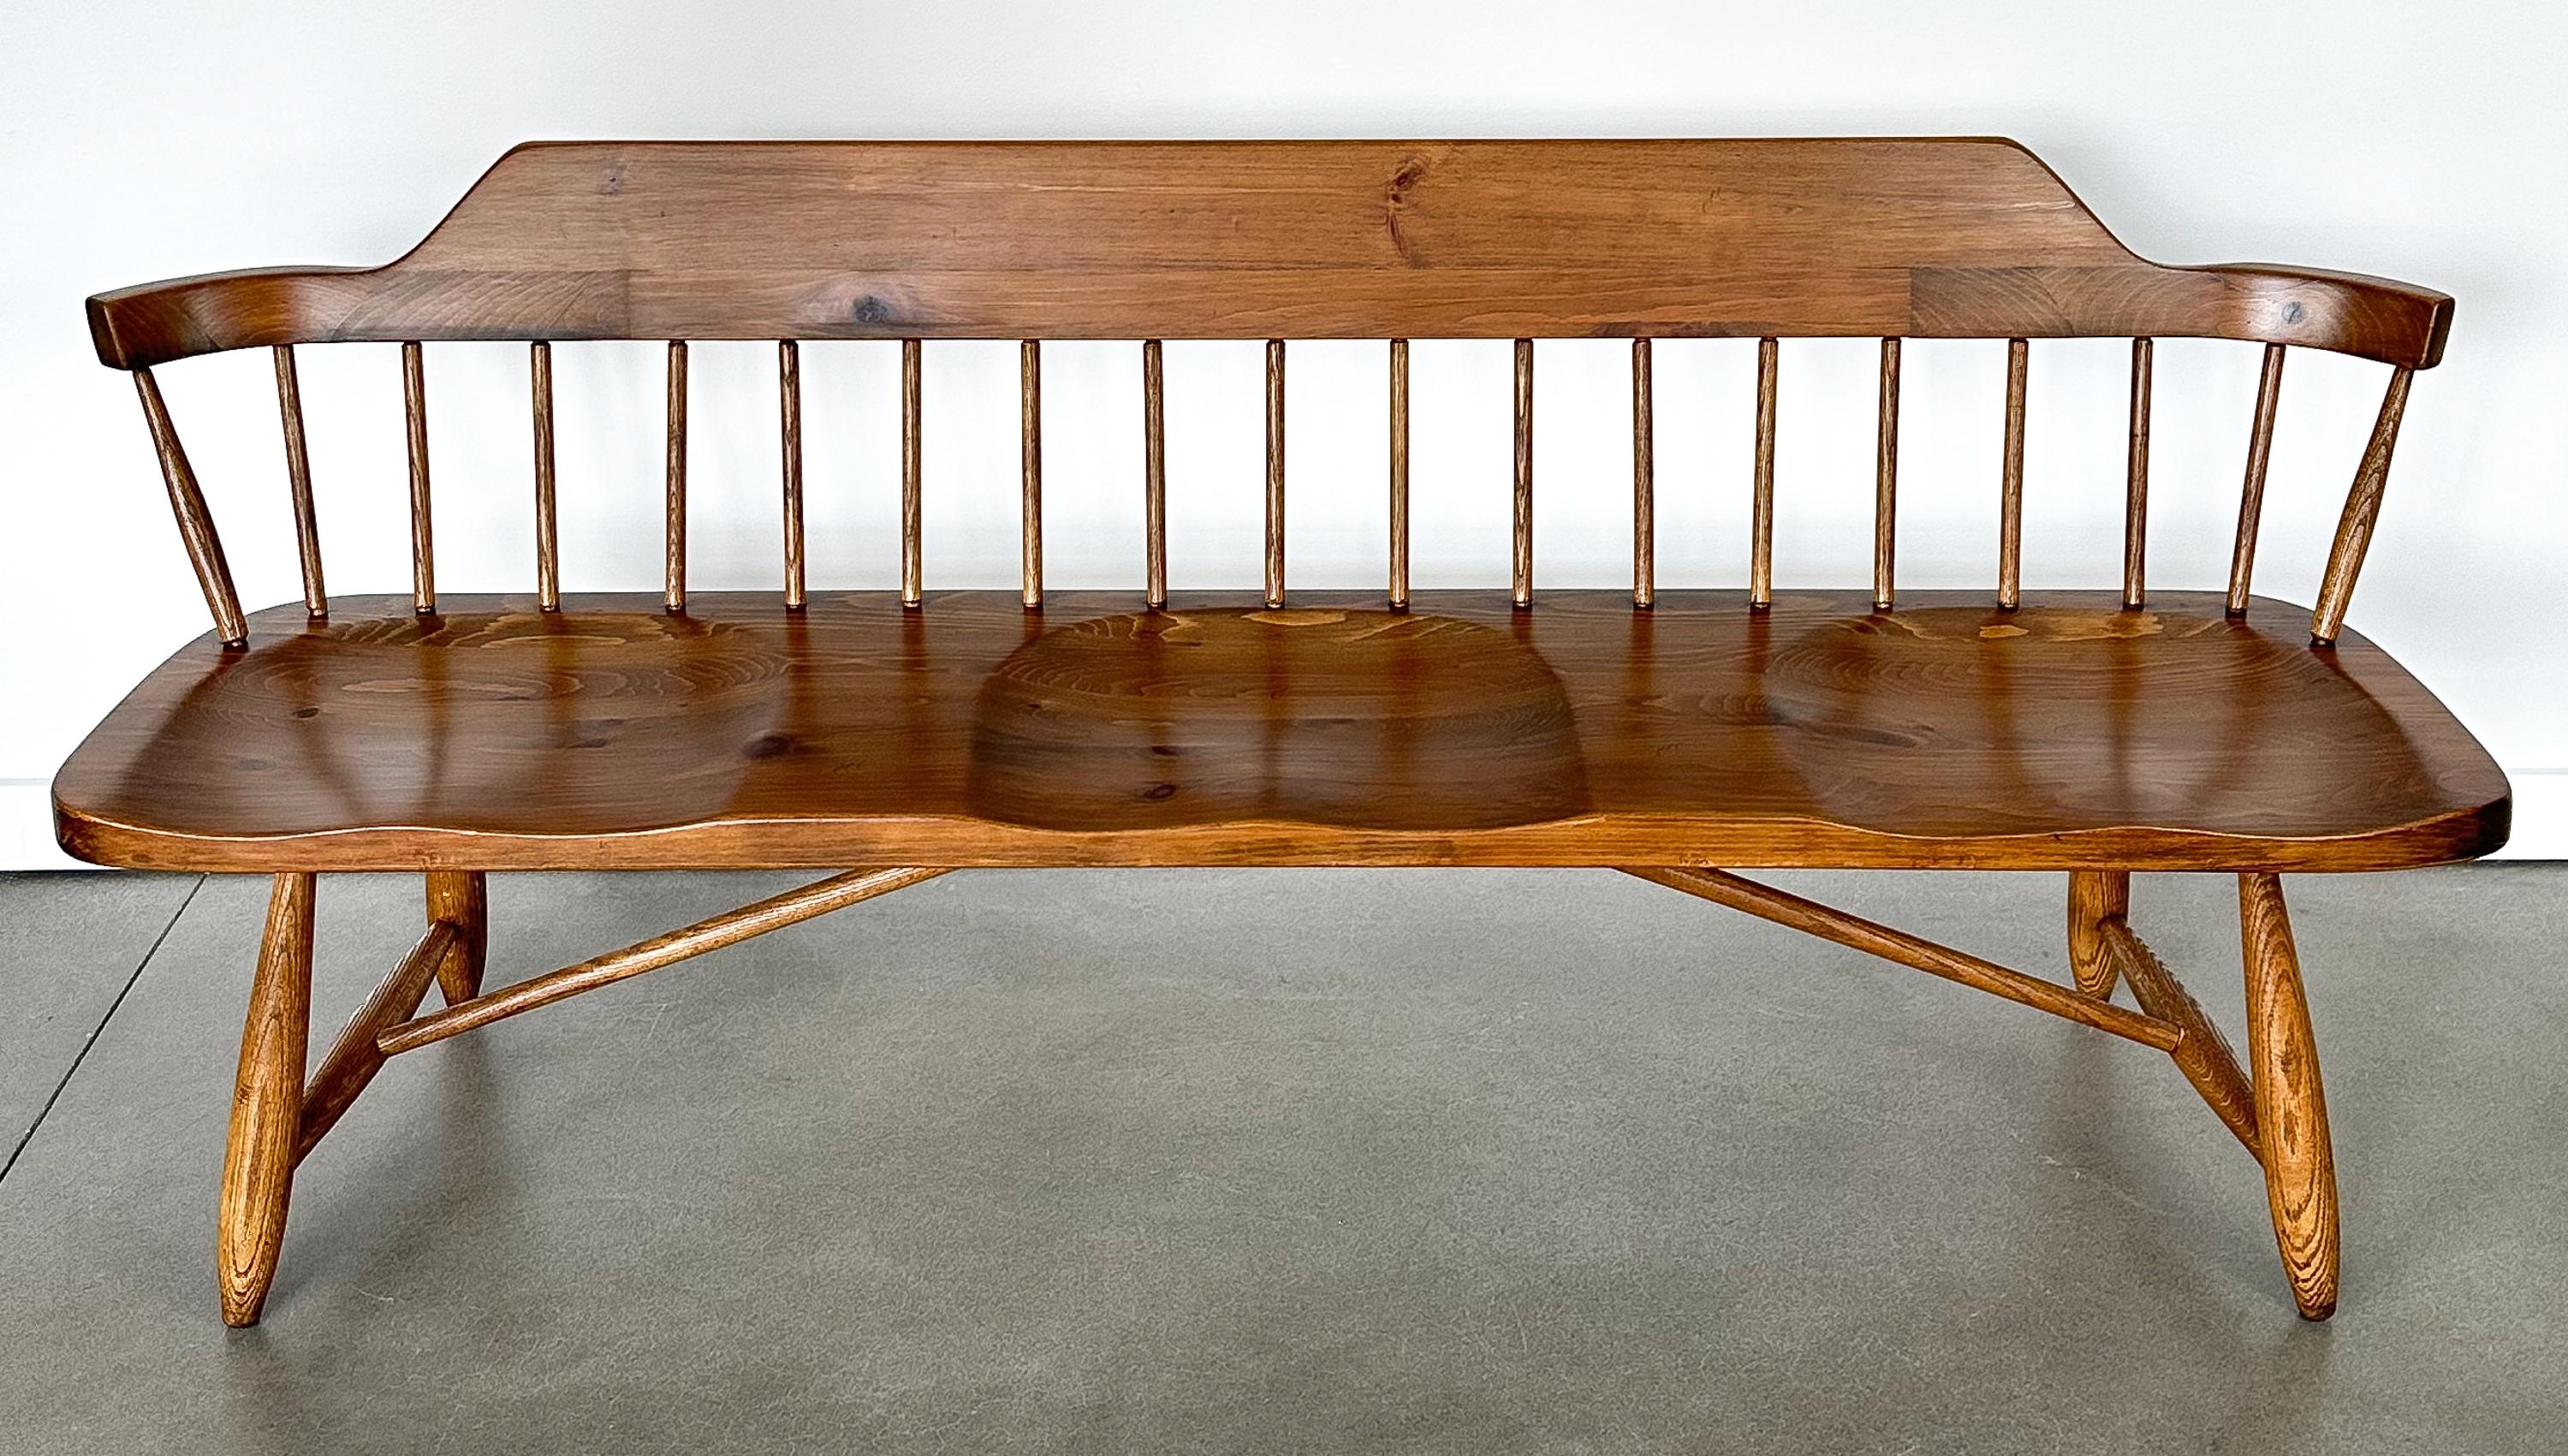 A mid-century spindle back three seat bench by Conant Ball, circa 1950s. The seat and back are constructed from solid pine and are stained in a medium walnut tone. Legs are solid oak. The seat features three individual sculpted seats. Backrest has